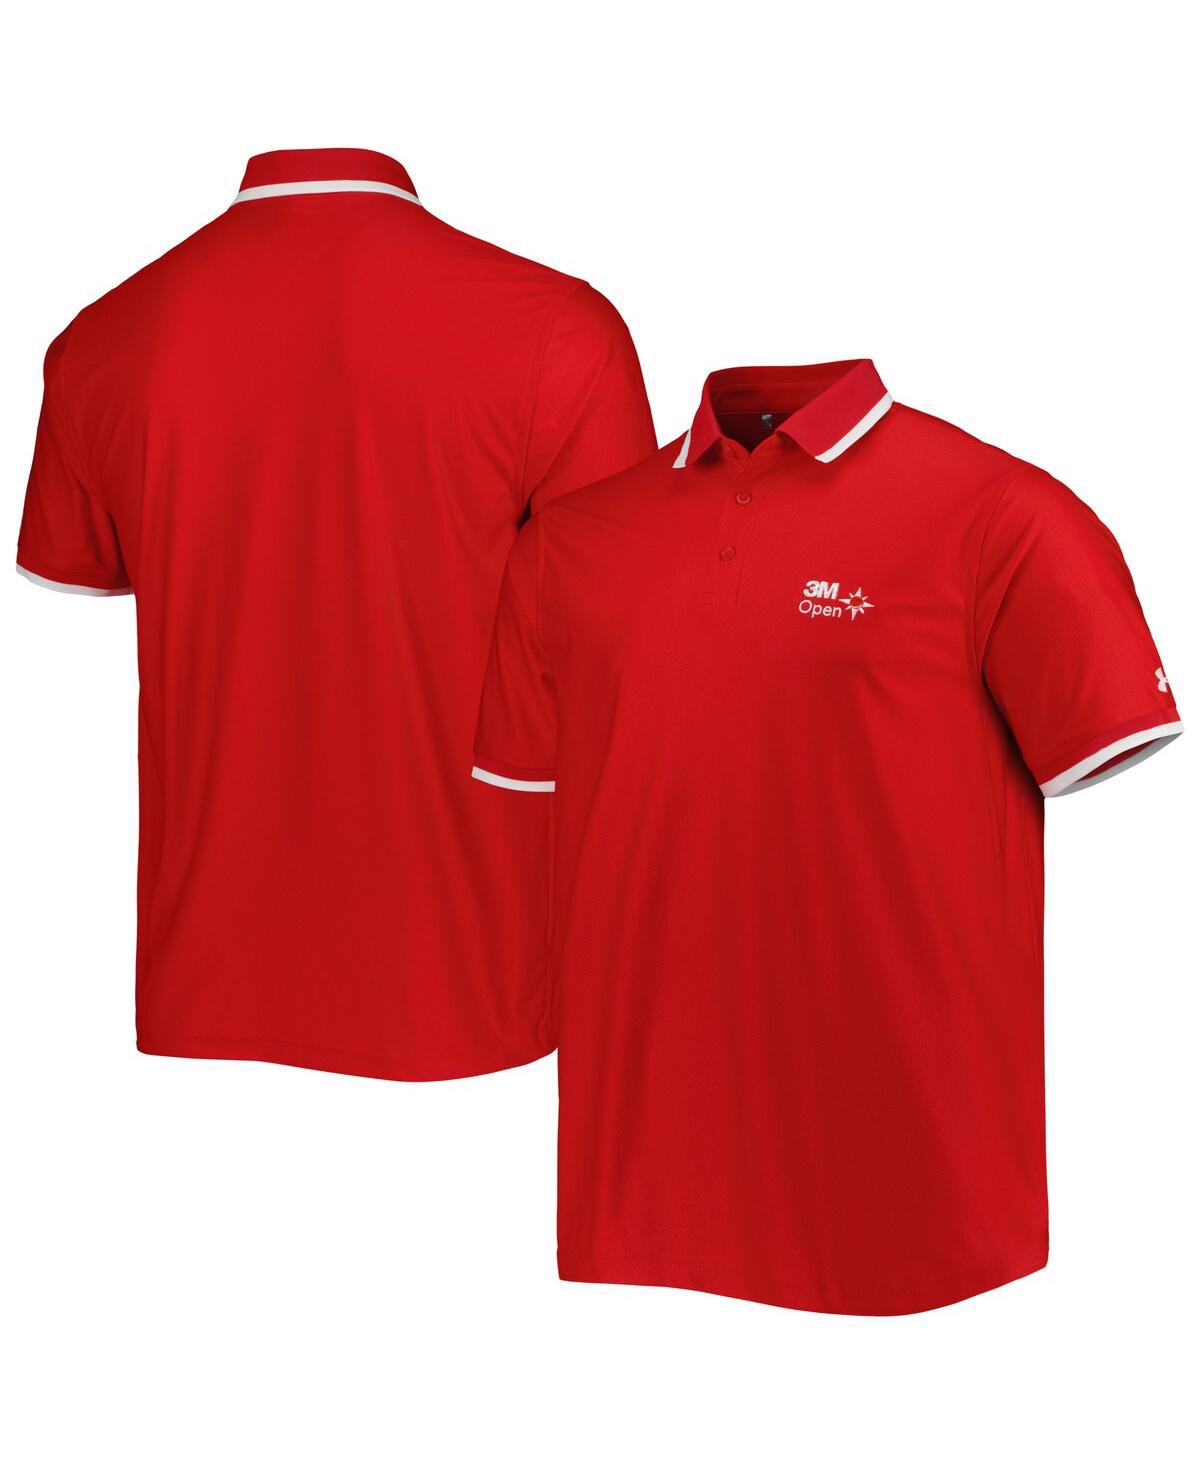 Under Armour Men's  Red Fedex St. Jude Championship Playoff 2.0 Performance Pique Polo Shirt